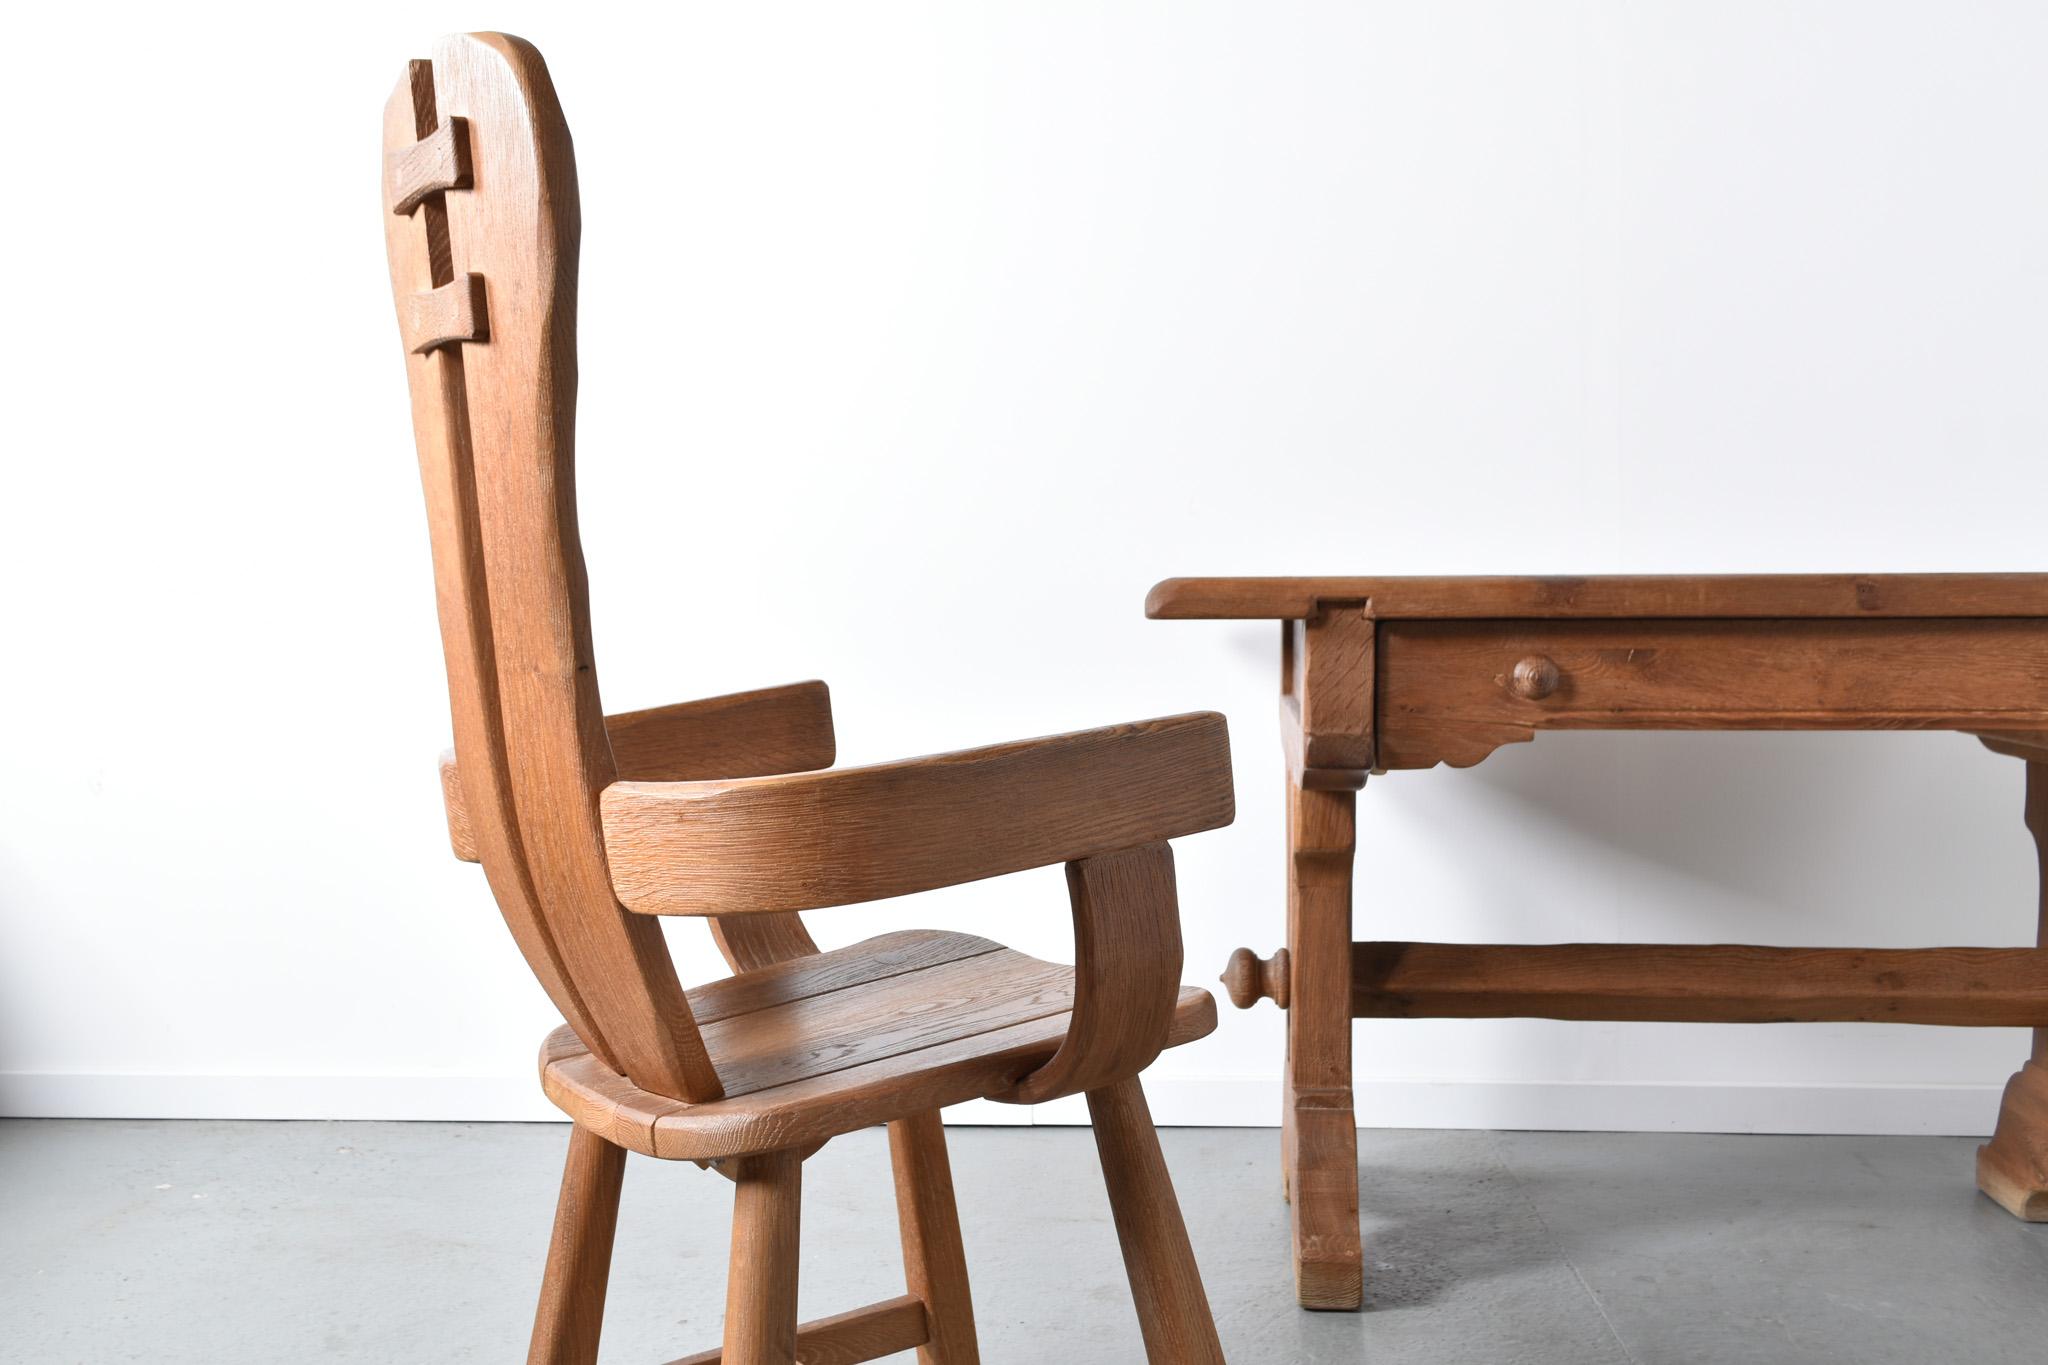 Late 20th Century De Puydt Desk and chair set